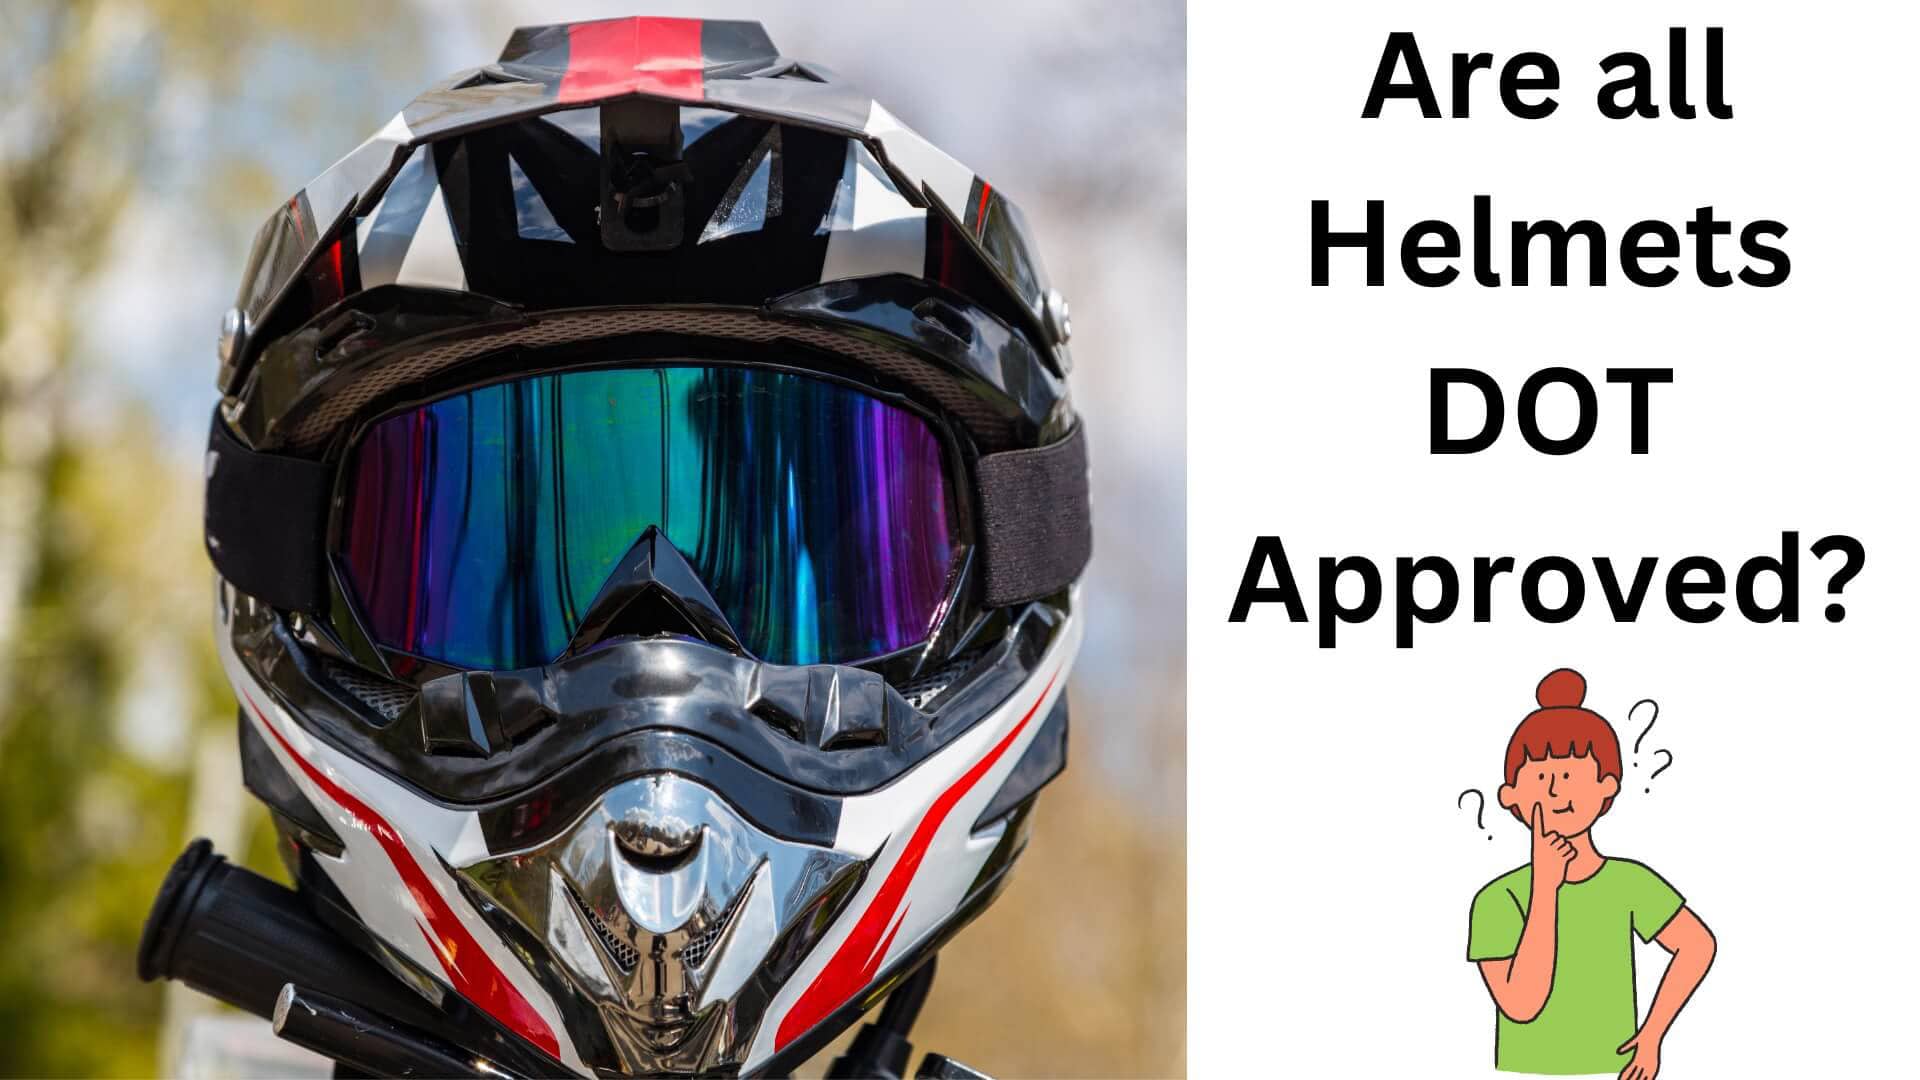 Are all helmets dot approved?